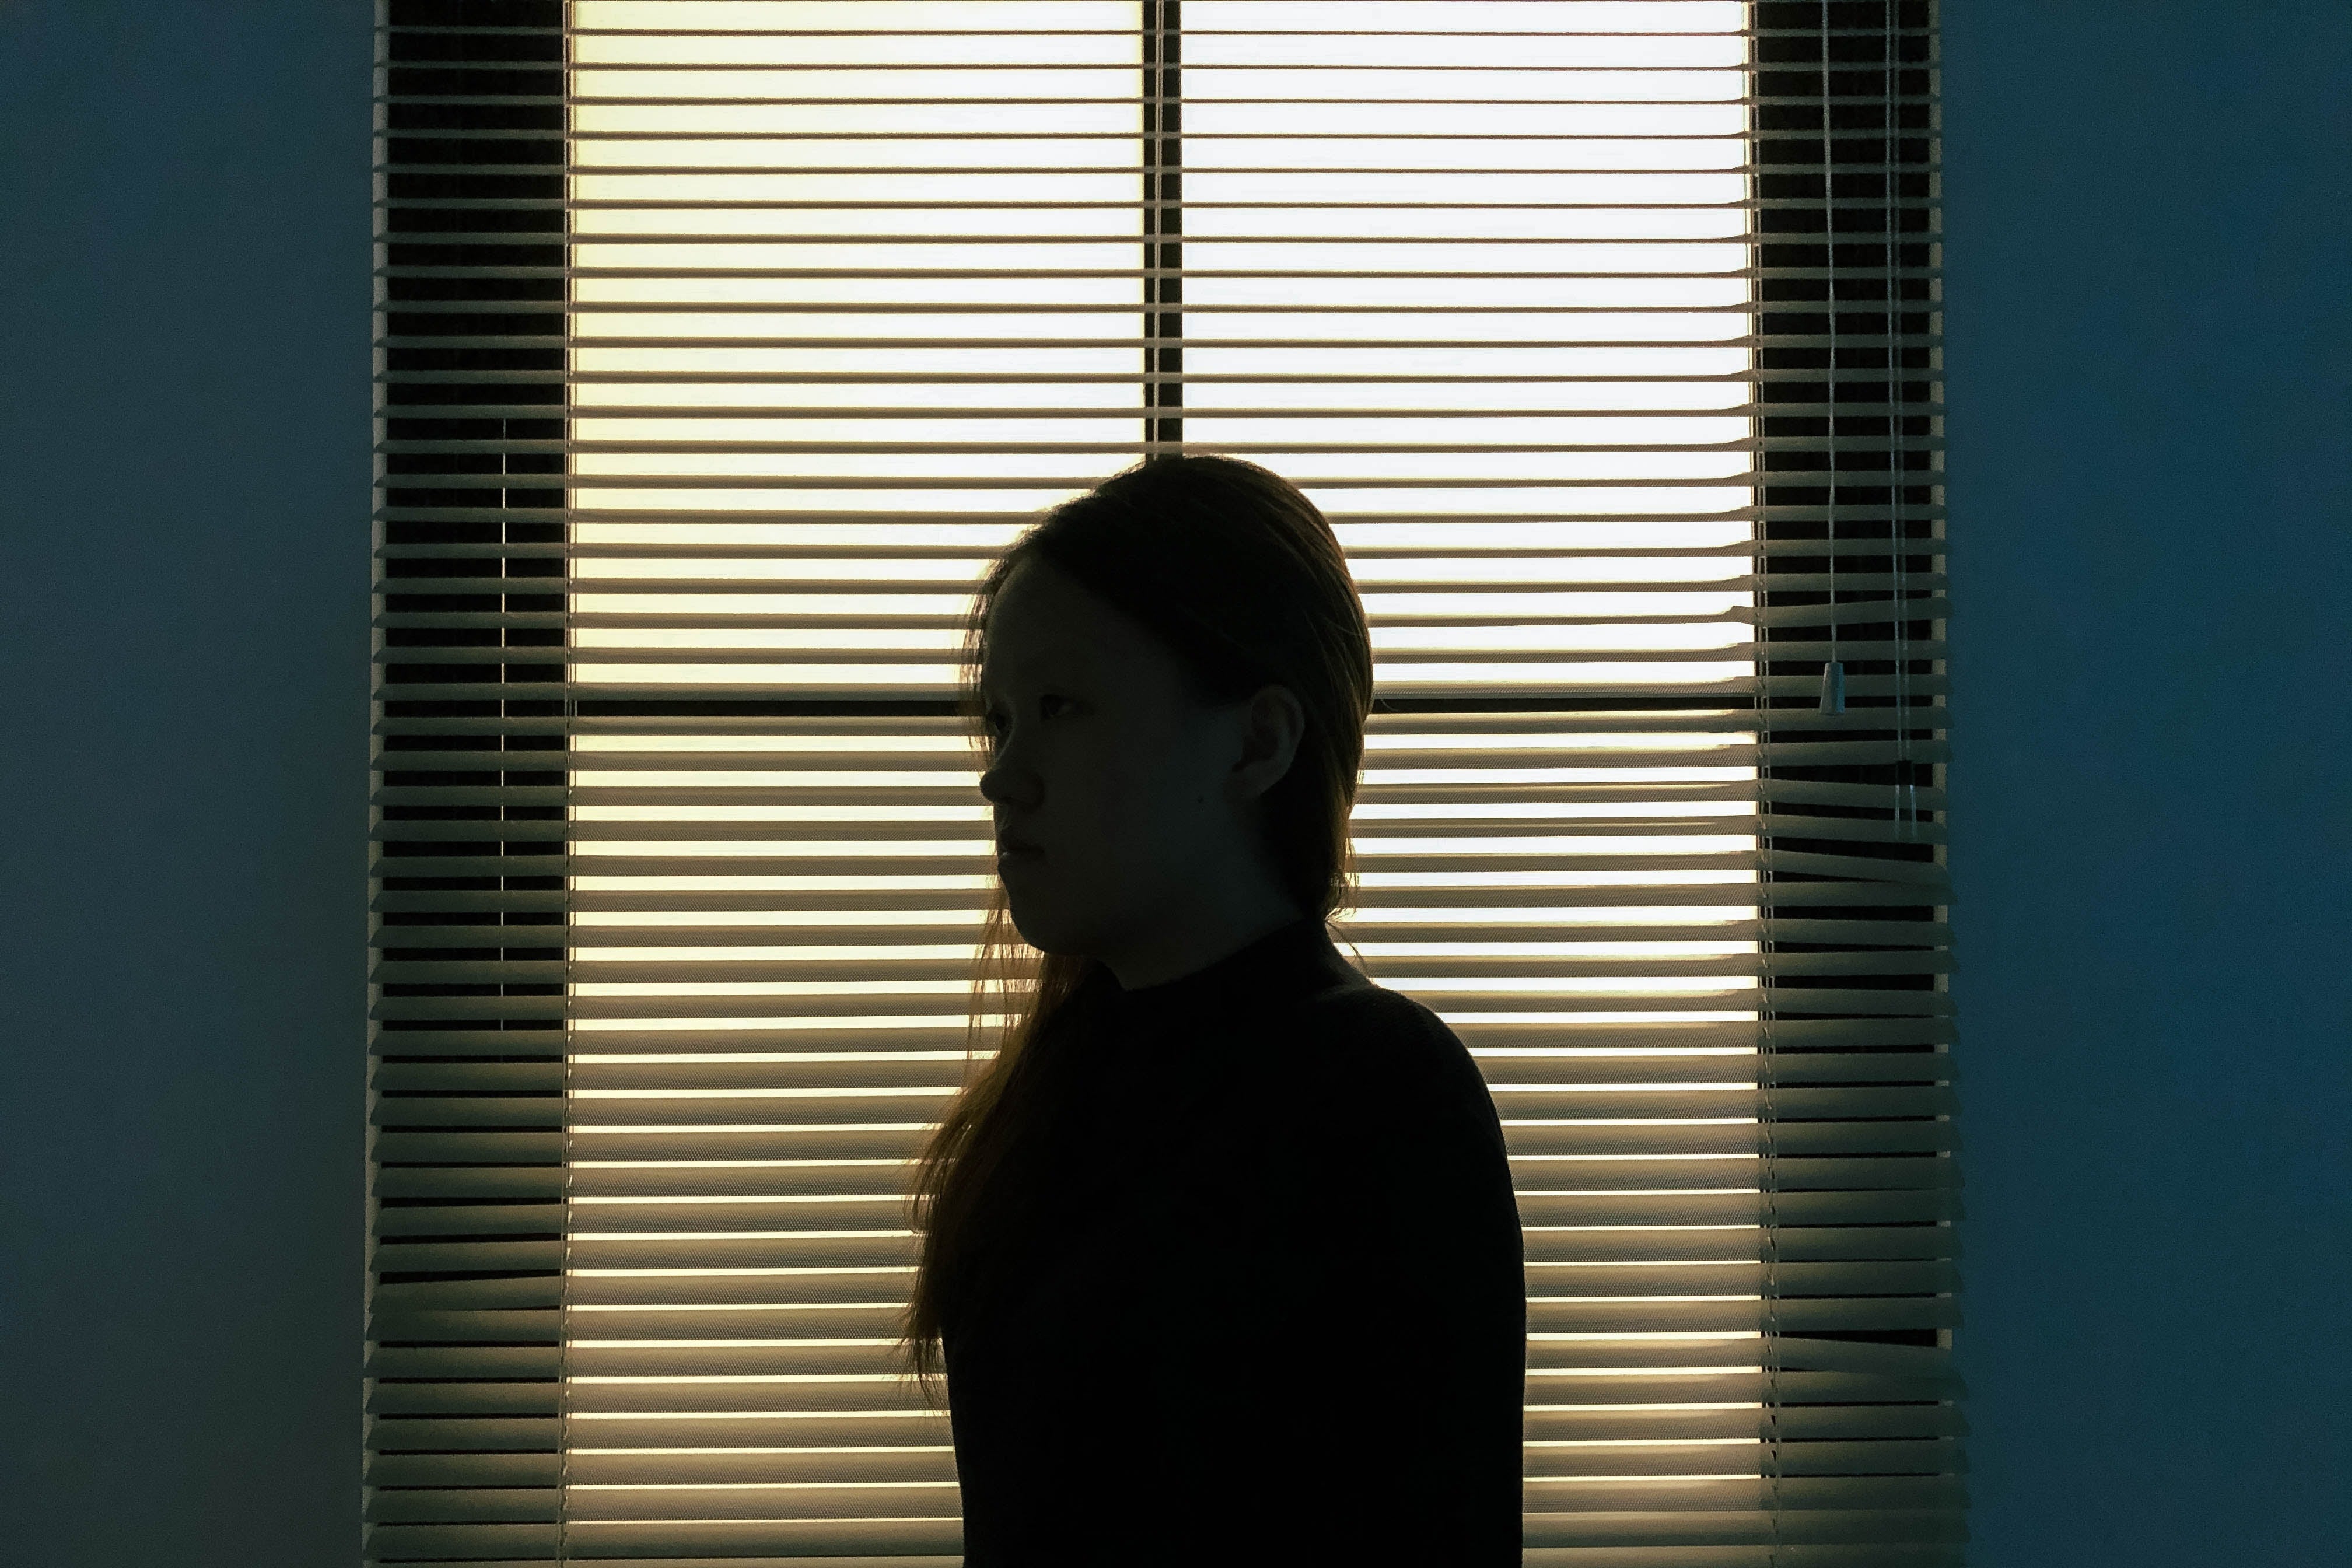 The silhouette of a woman standing in front of a window with the blinds closed.